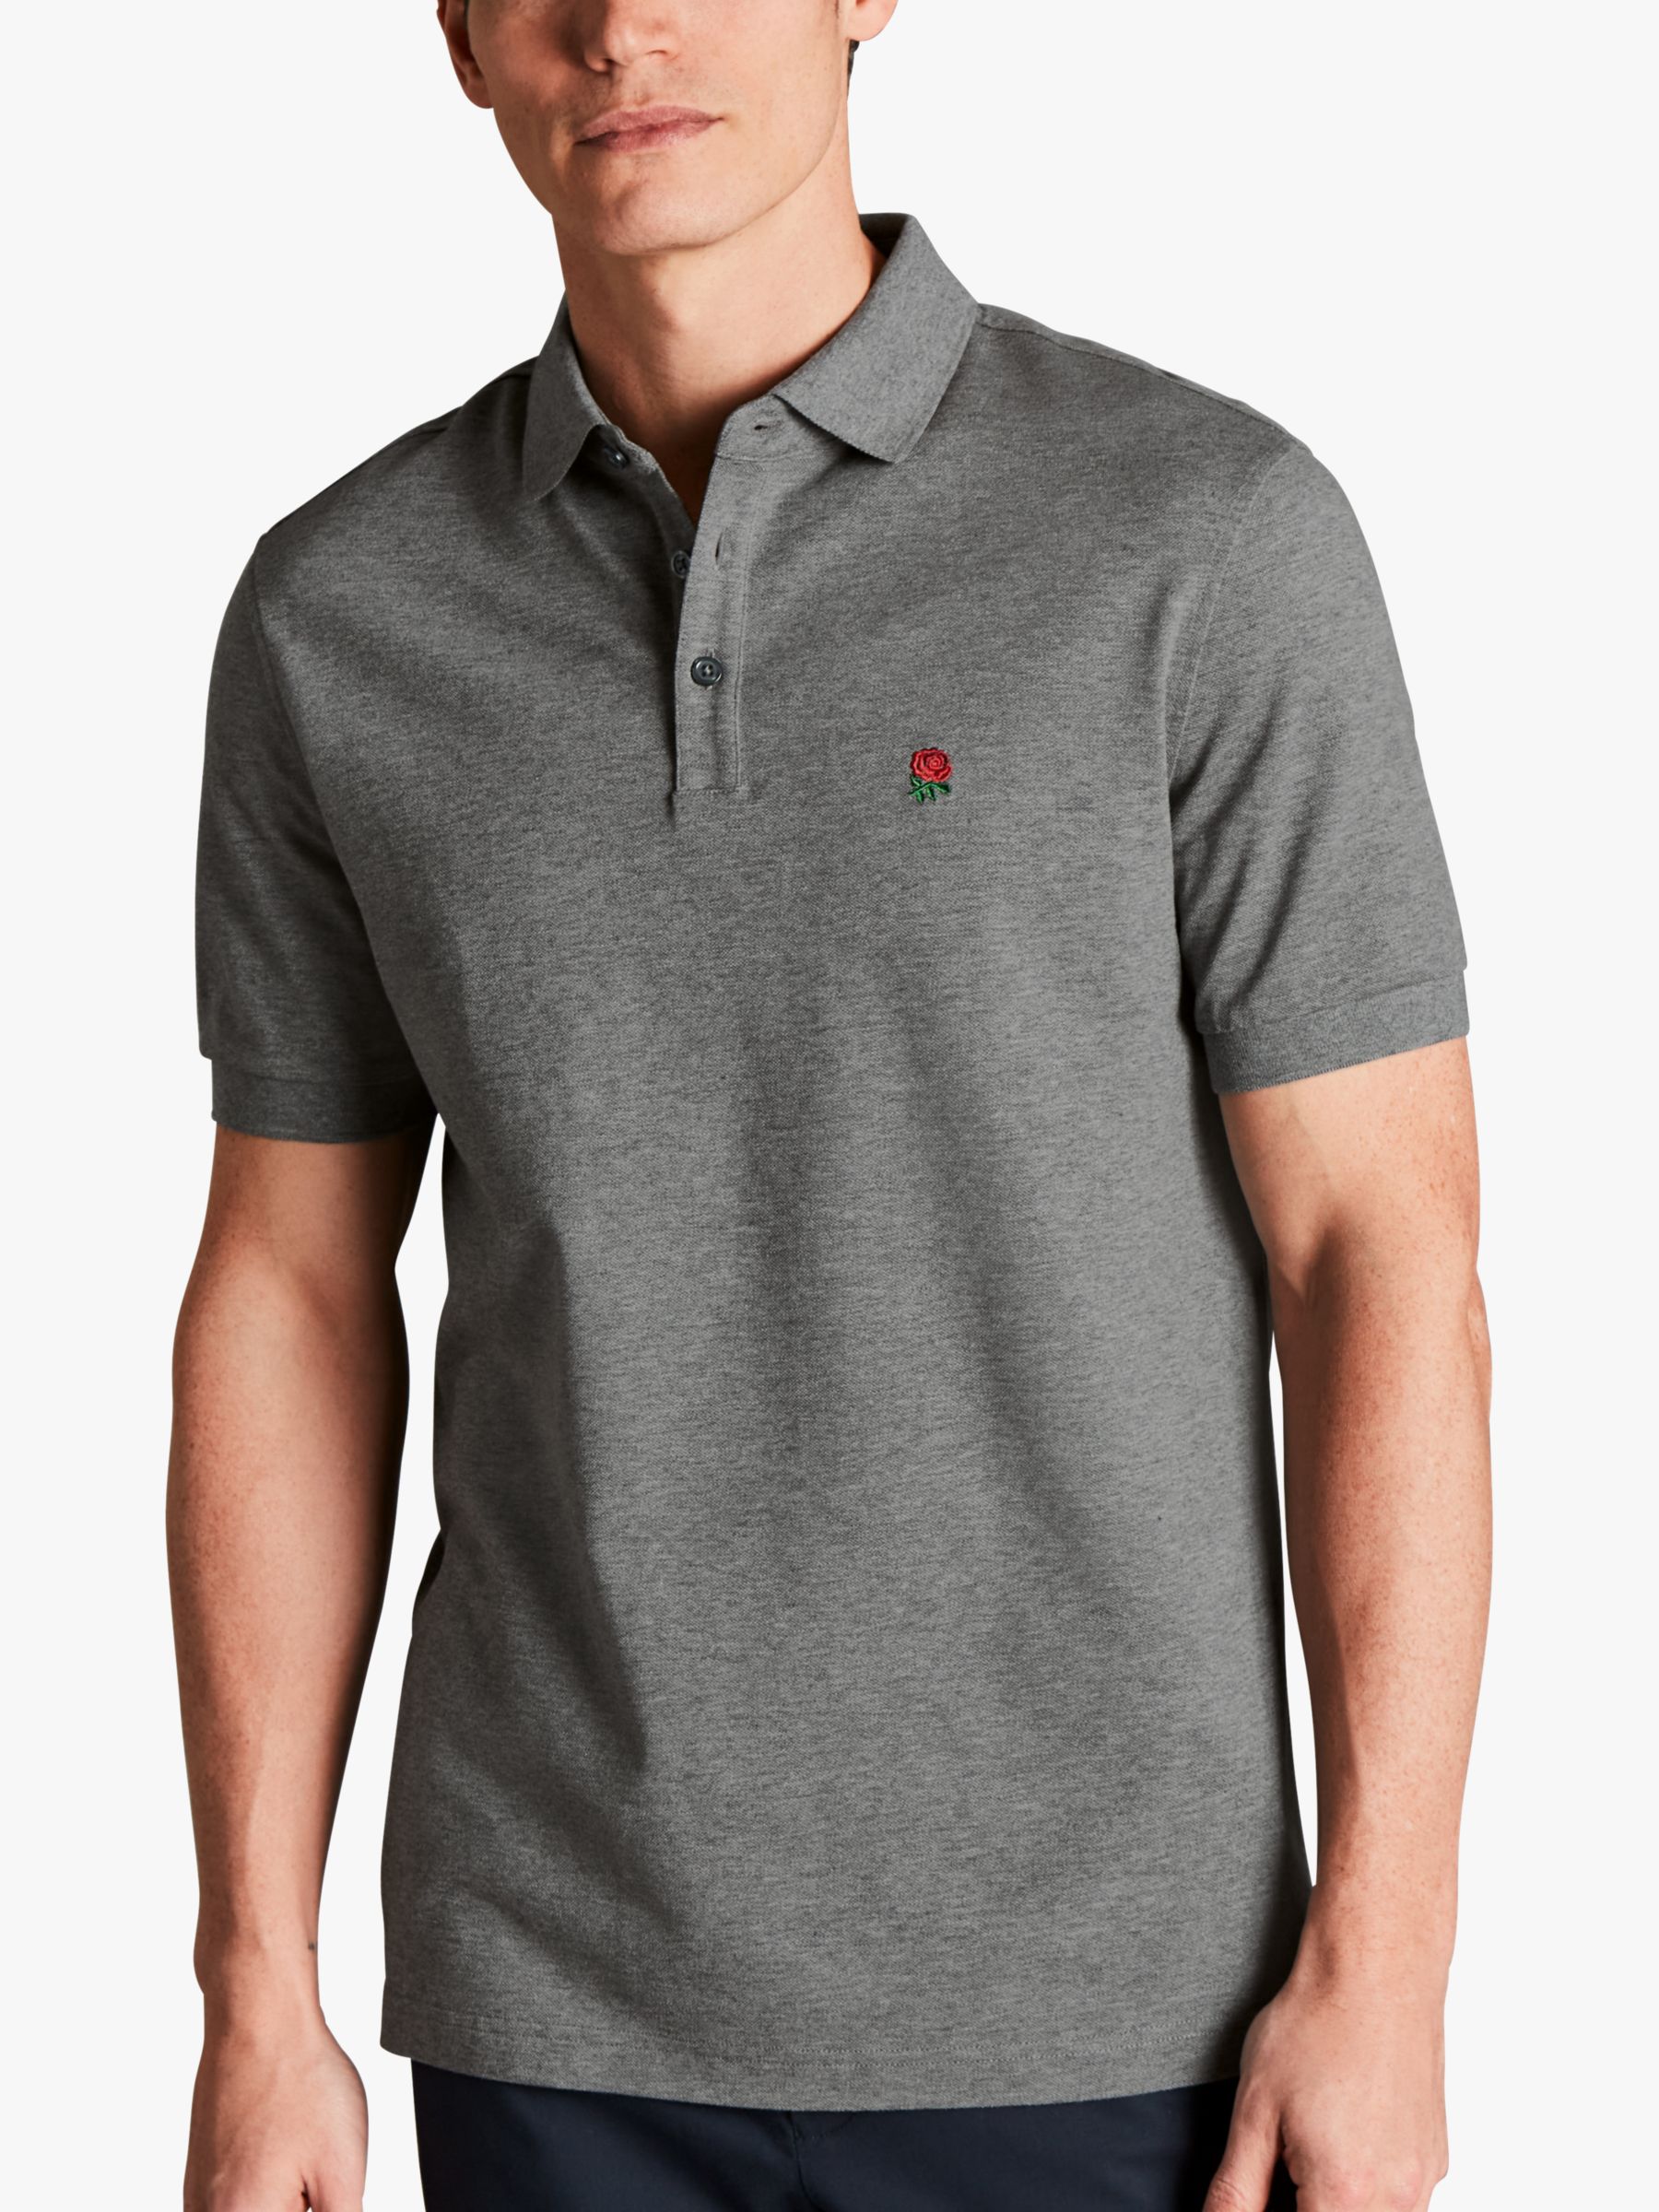 Collared Men\'s Polo & Rugby Shirts | John Lewis & Partners